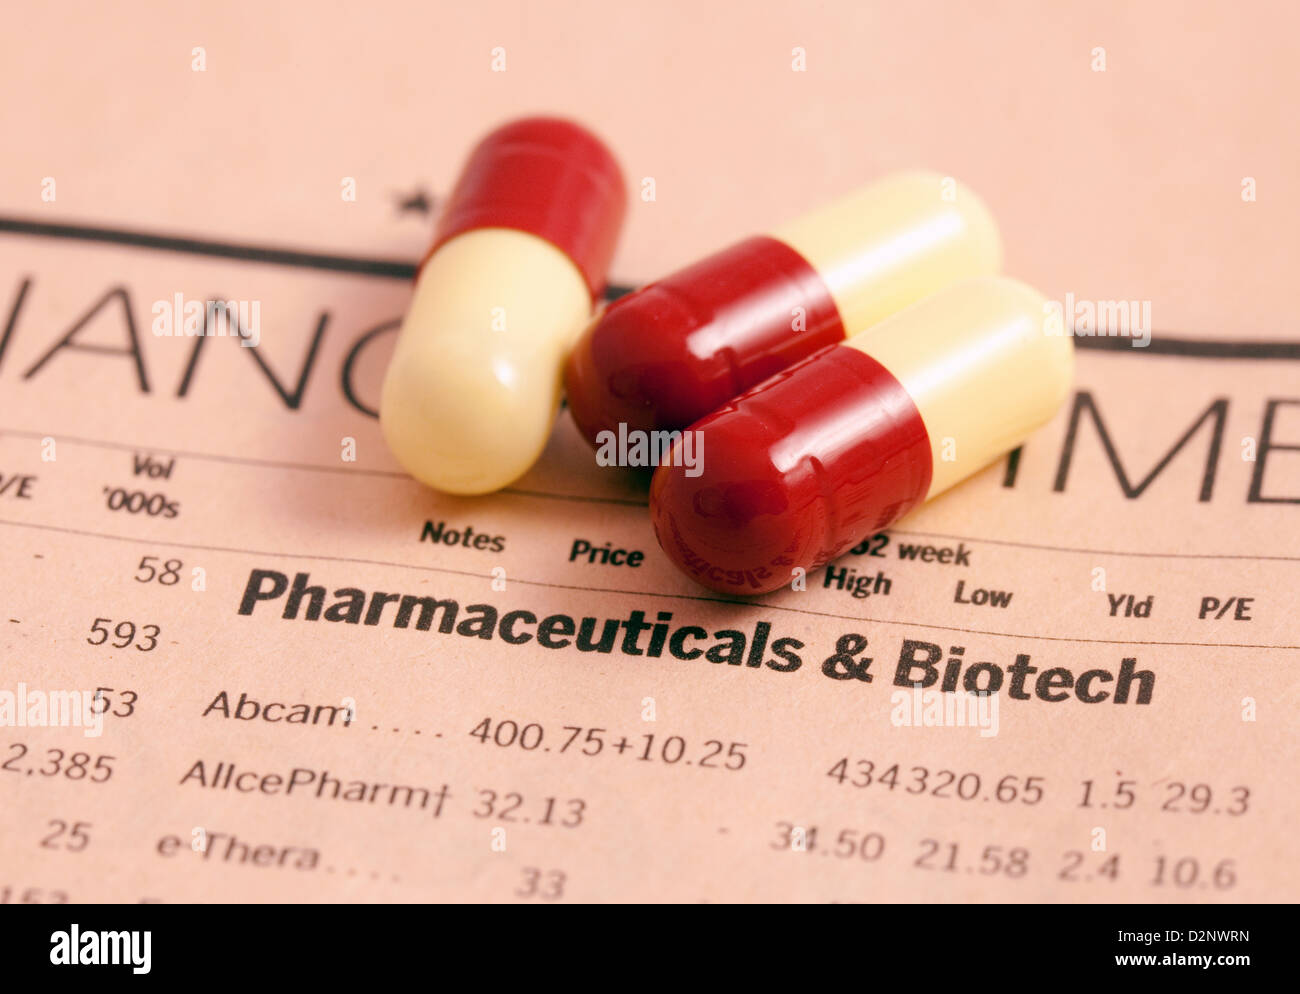 Drugs and Pharmaceuticals stocks and shares in the Financial times, drug companies concept UK Stock Photo